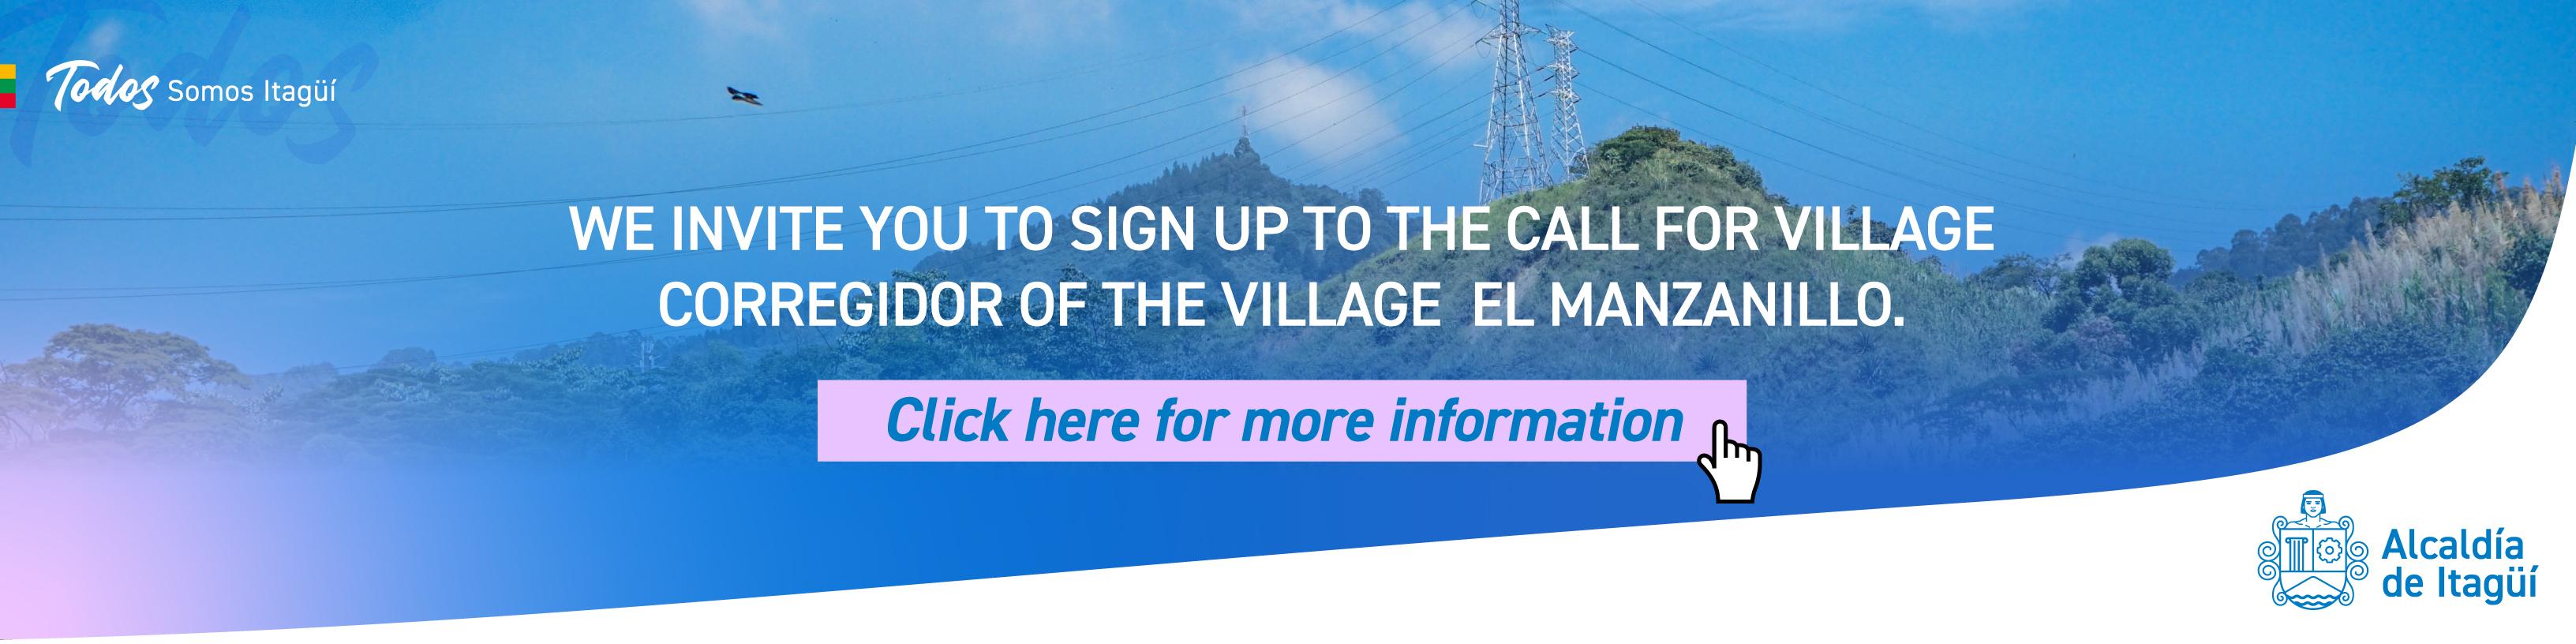 Participate in the open call to be mayor of the El Manzanillo district